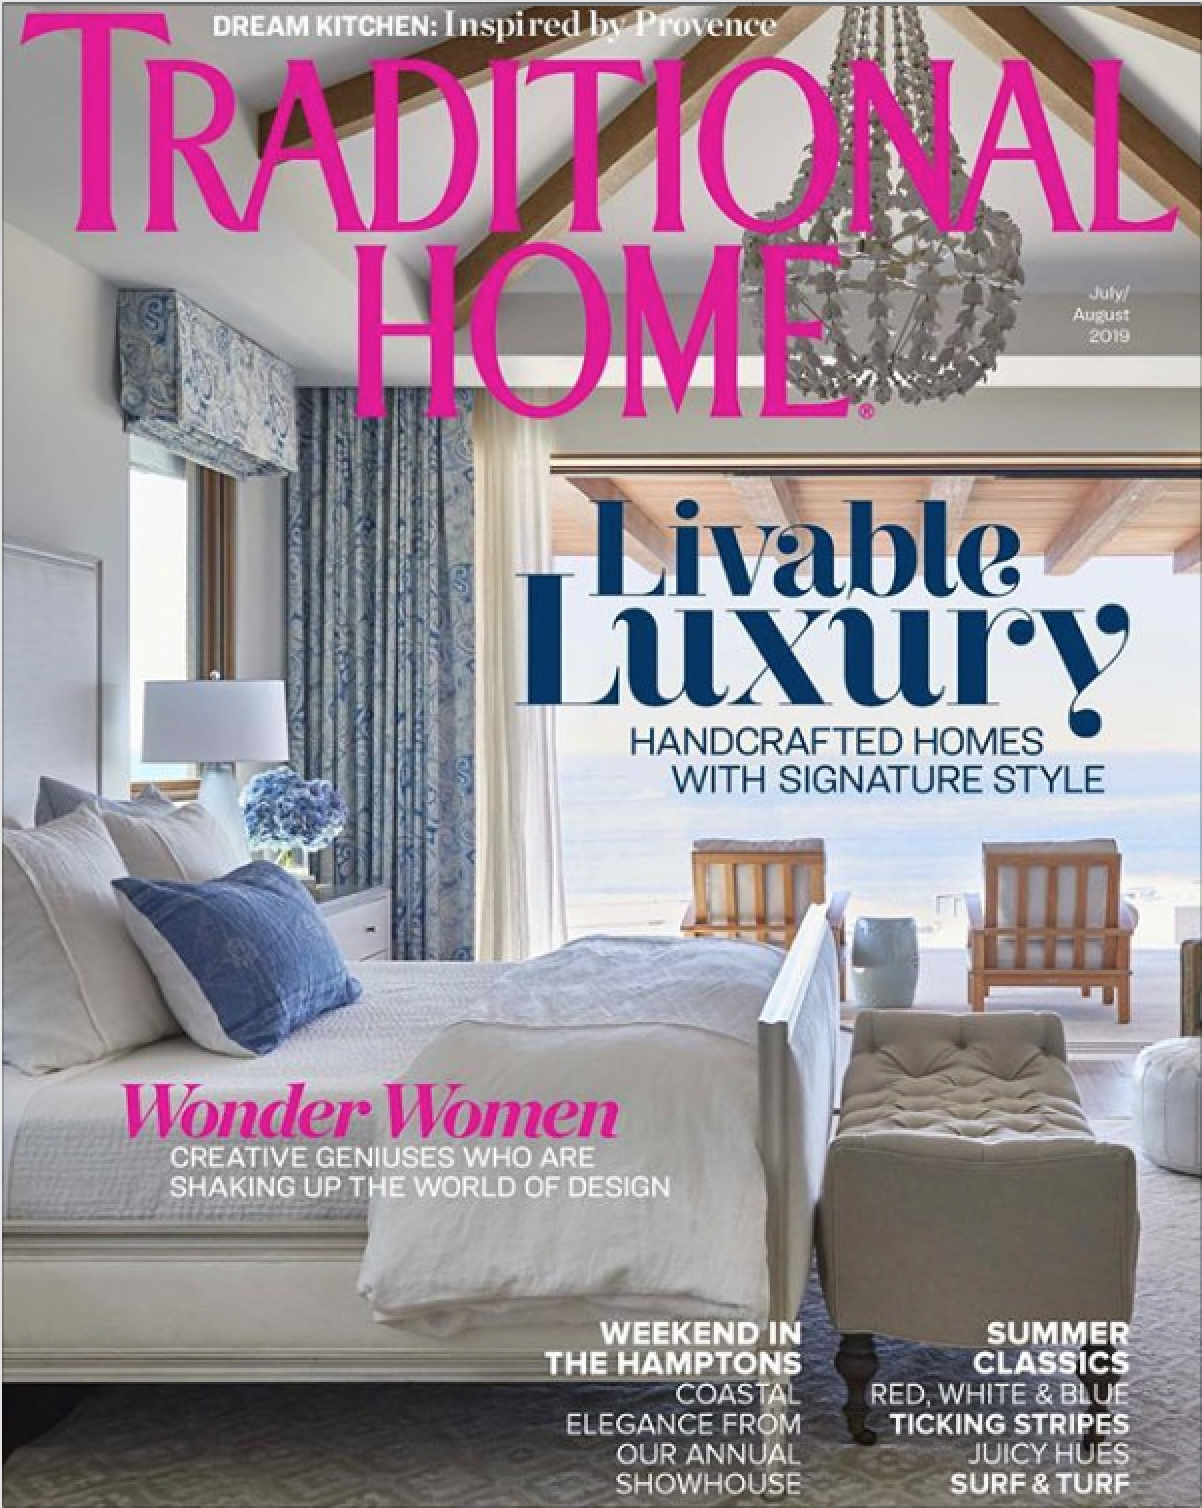 TRADITIONAL HOME July/Aug 19